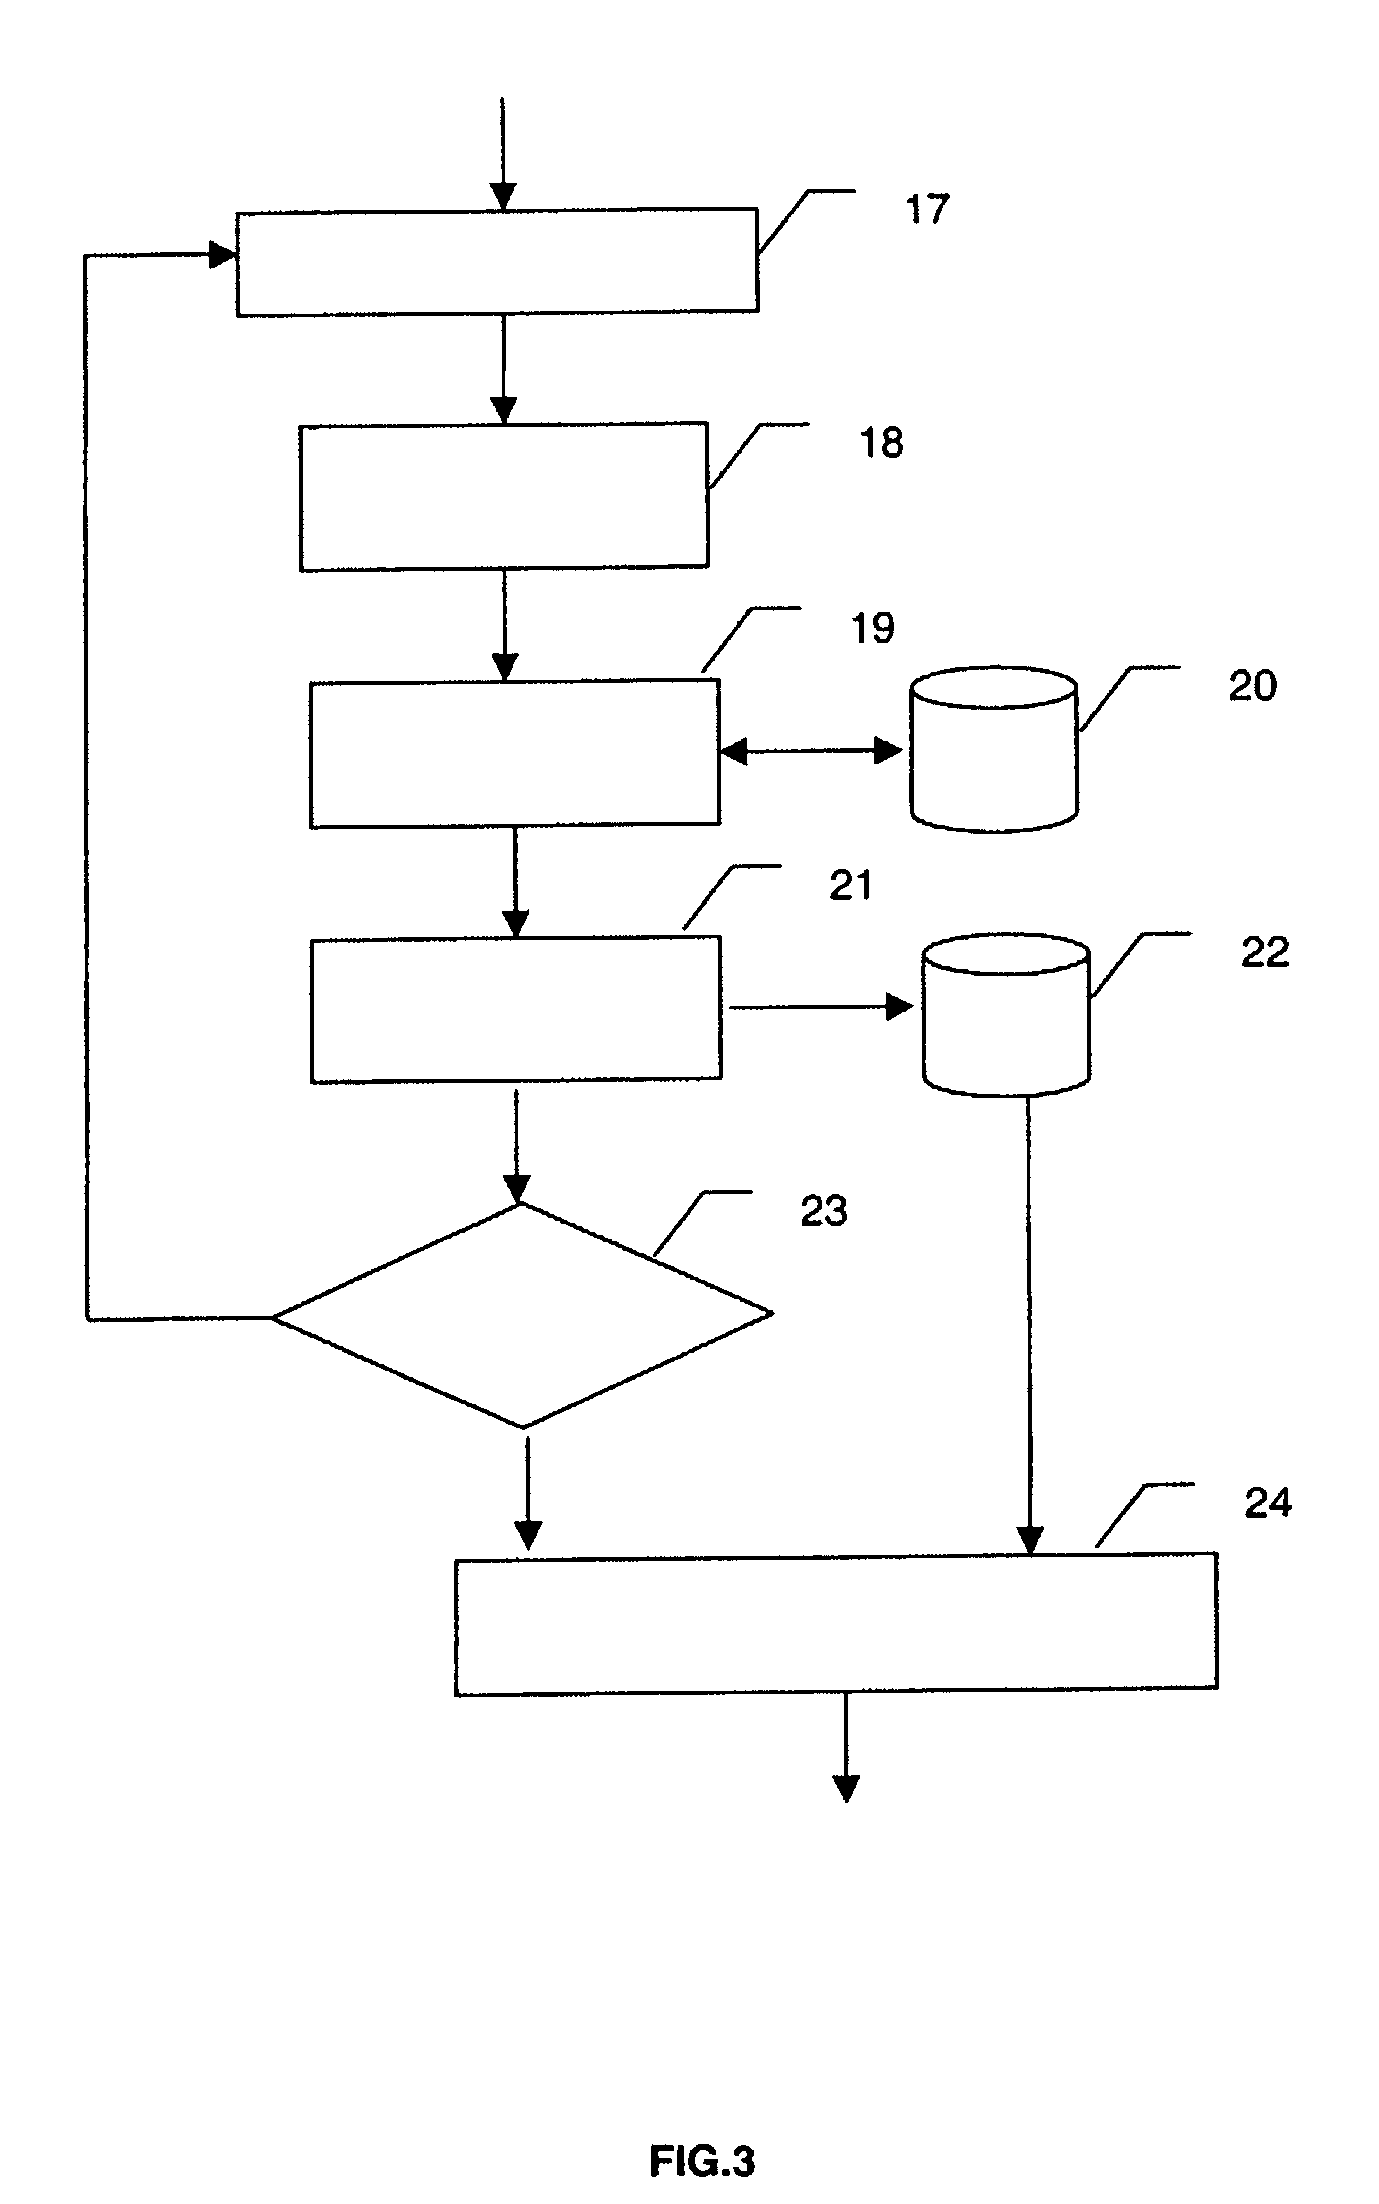 Process and device for decoding video data coded according to the MPEG standard